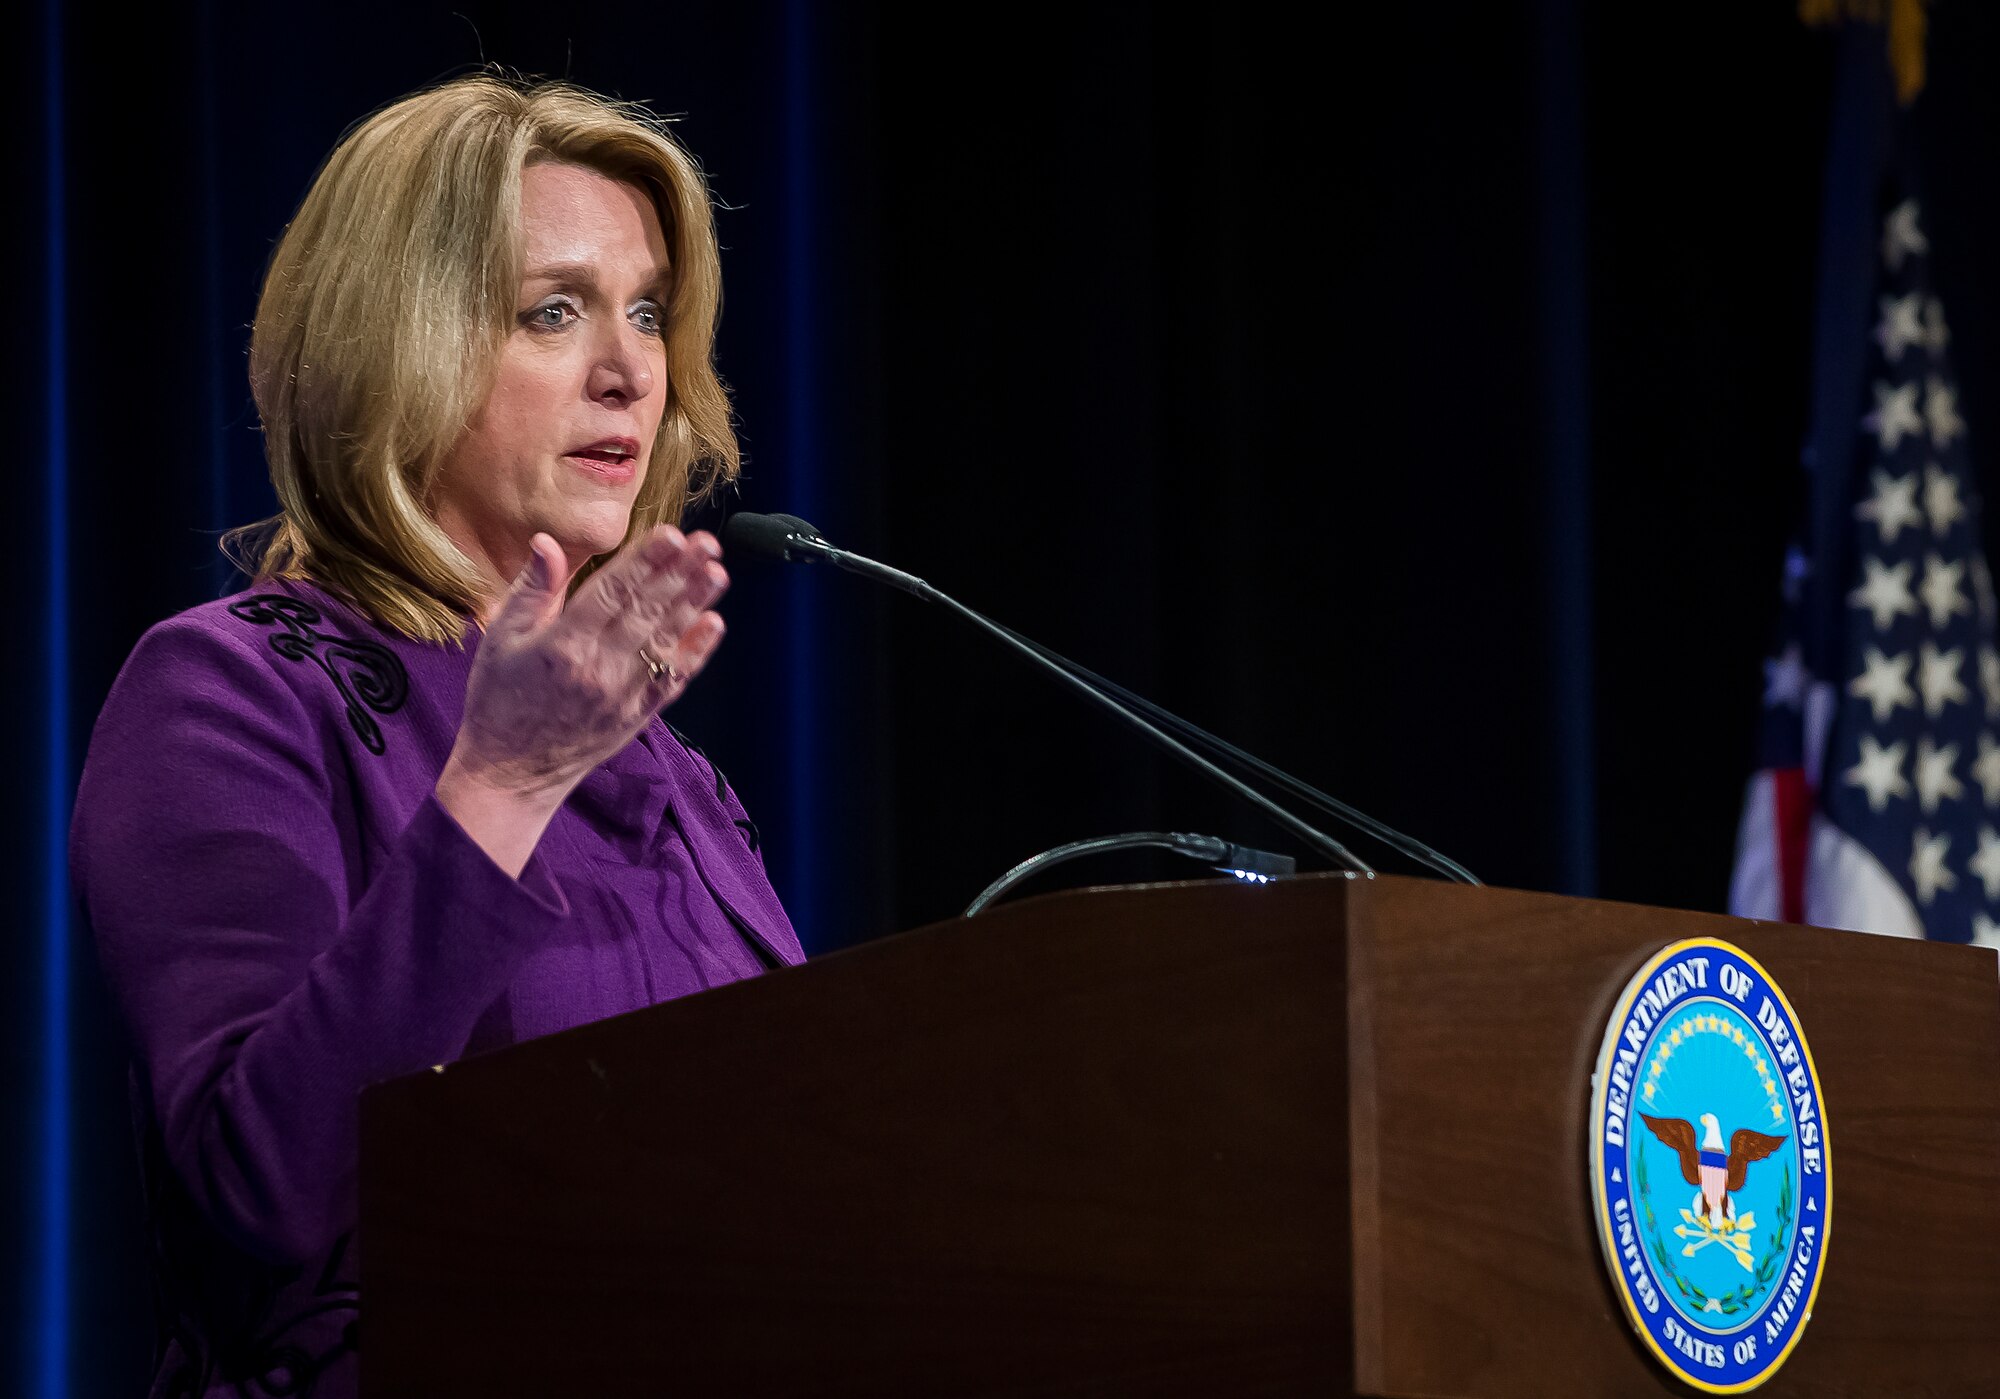 Deborah Lee James, the 23rd secretary of the Air Force, gives her remarks after being ceremoniously sworn in by Defense Secretary Chuck Hagel during a ceremony in the Pentagon, Washington, D.C., Jan. 24, 2014. James pledged to leave the Air Force some years from now on a path toward greater capability and better affordability. (U.S. Air Force photo/Jim Varhegyi)